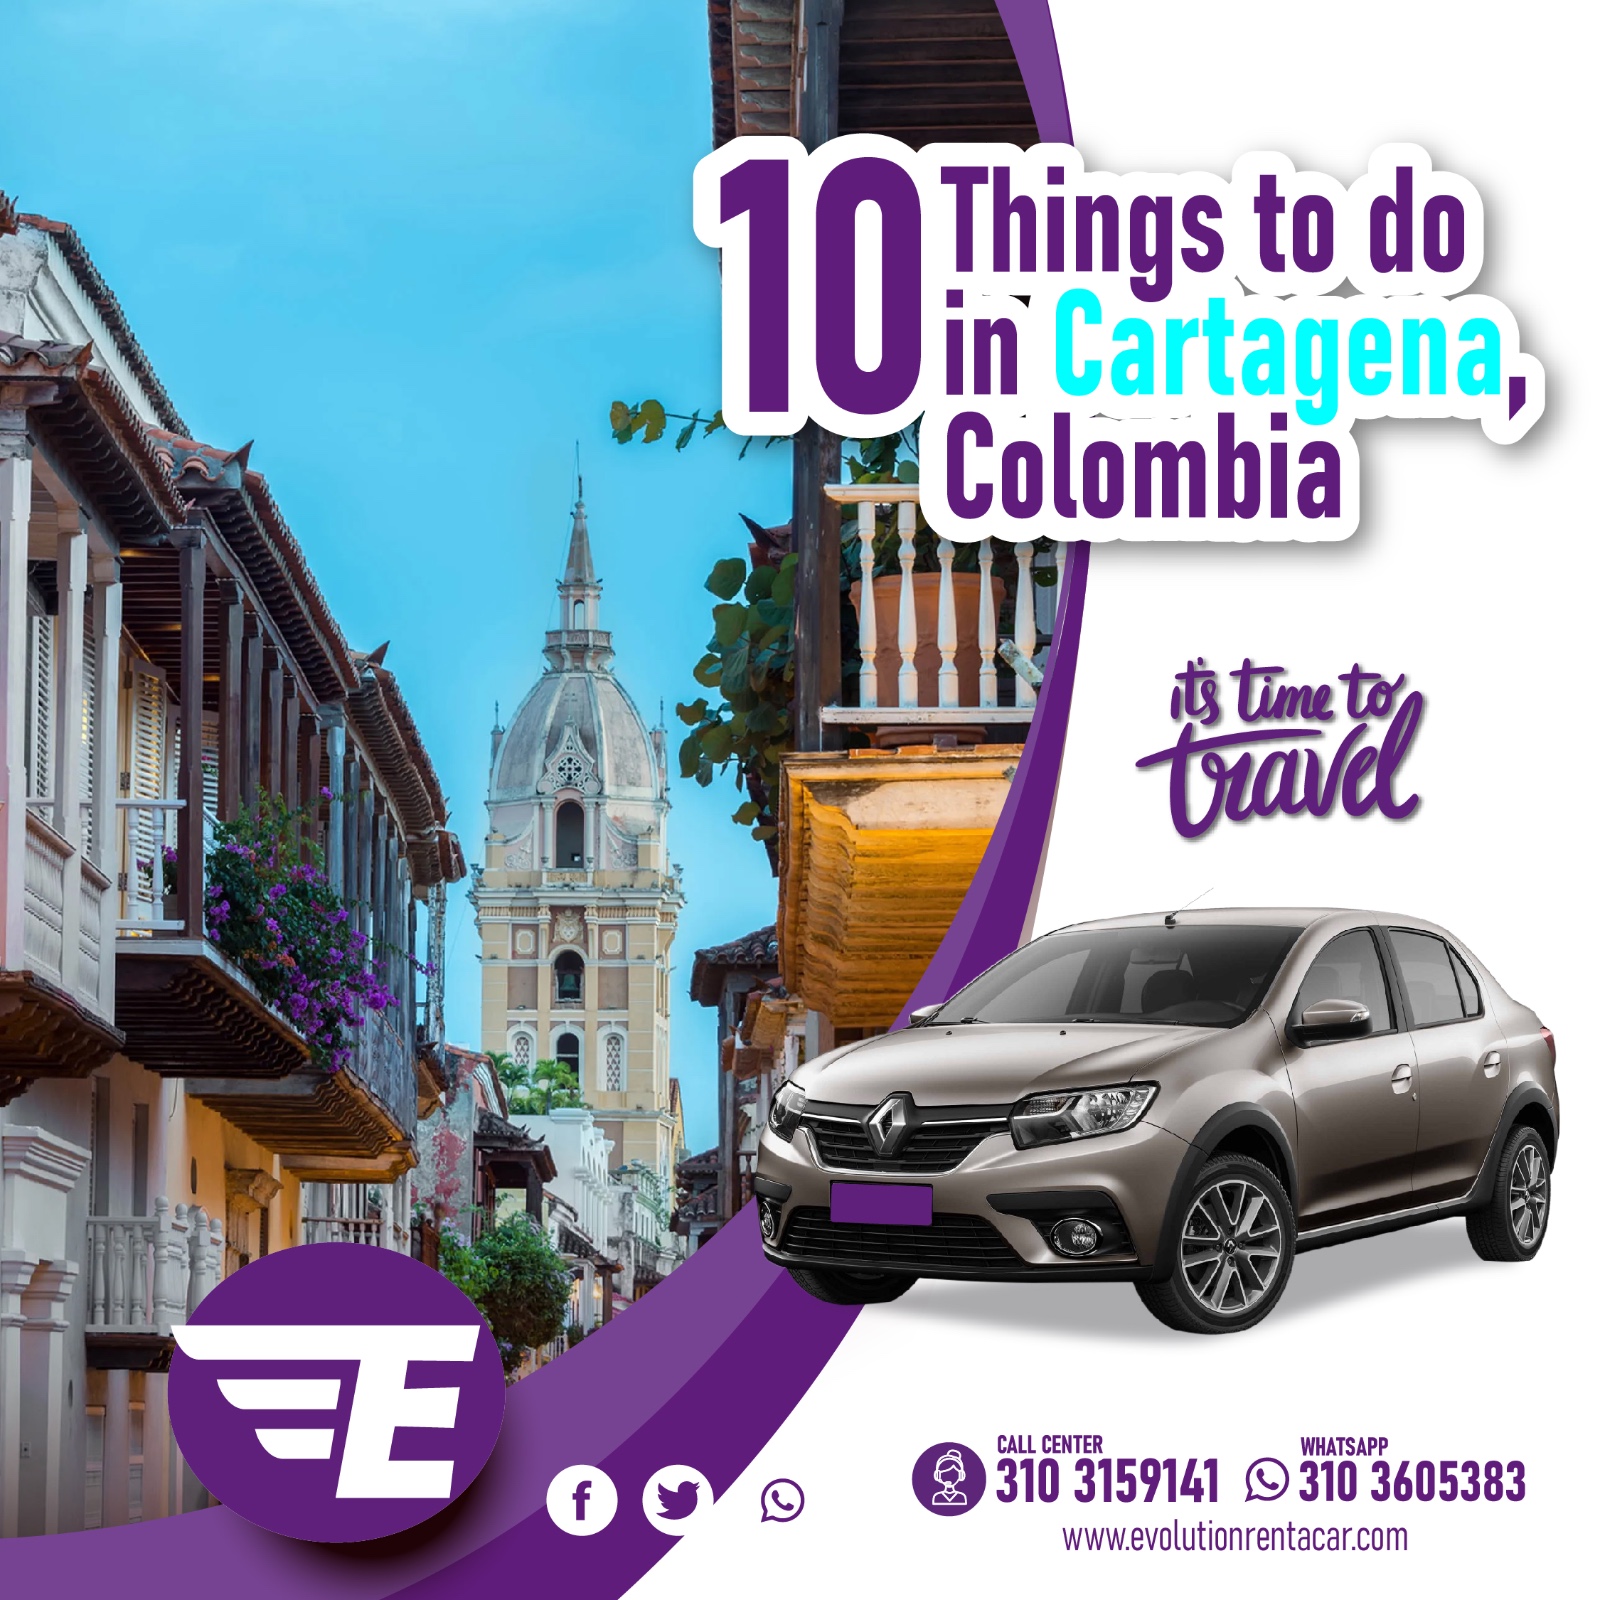 10 Things to Do in Cartagena with Evolution Rent a Car